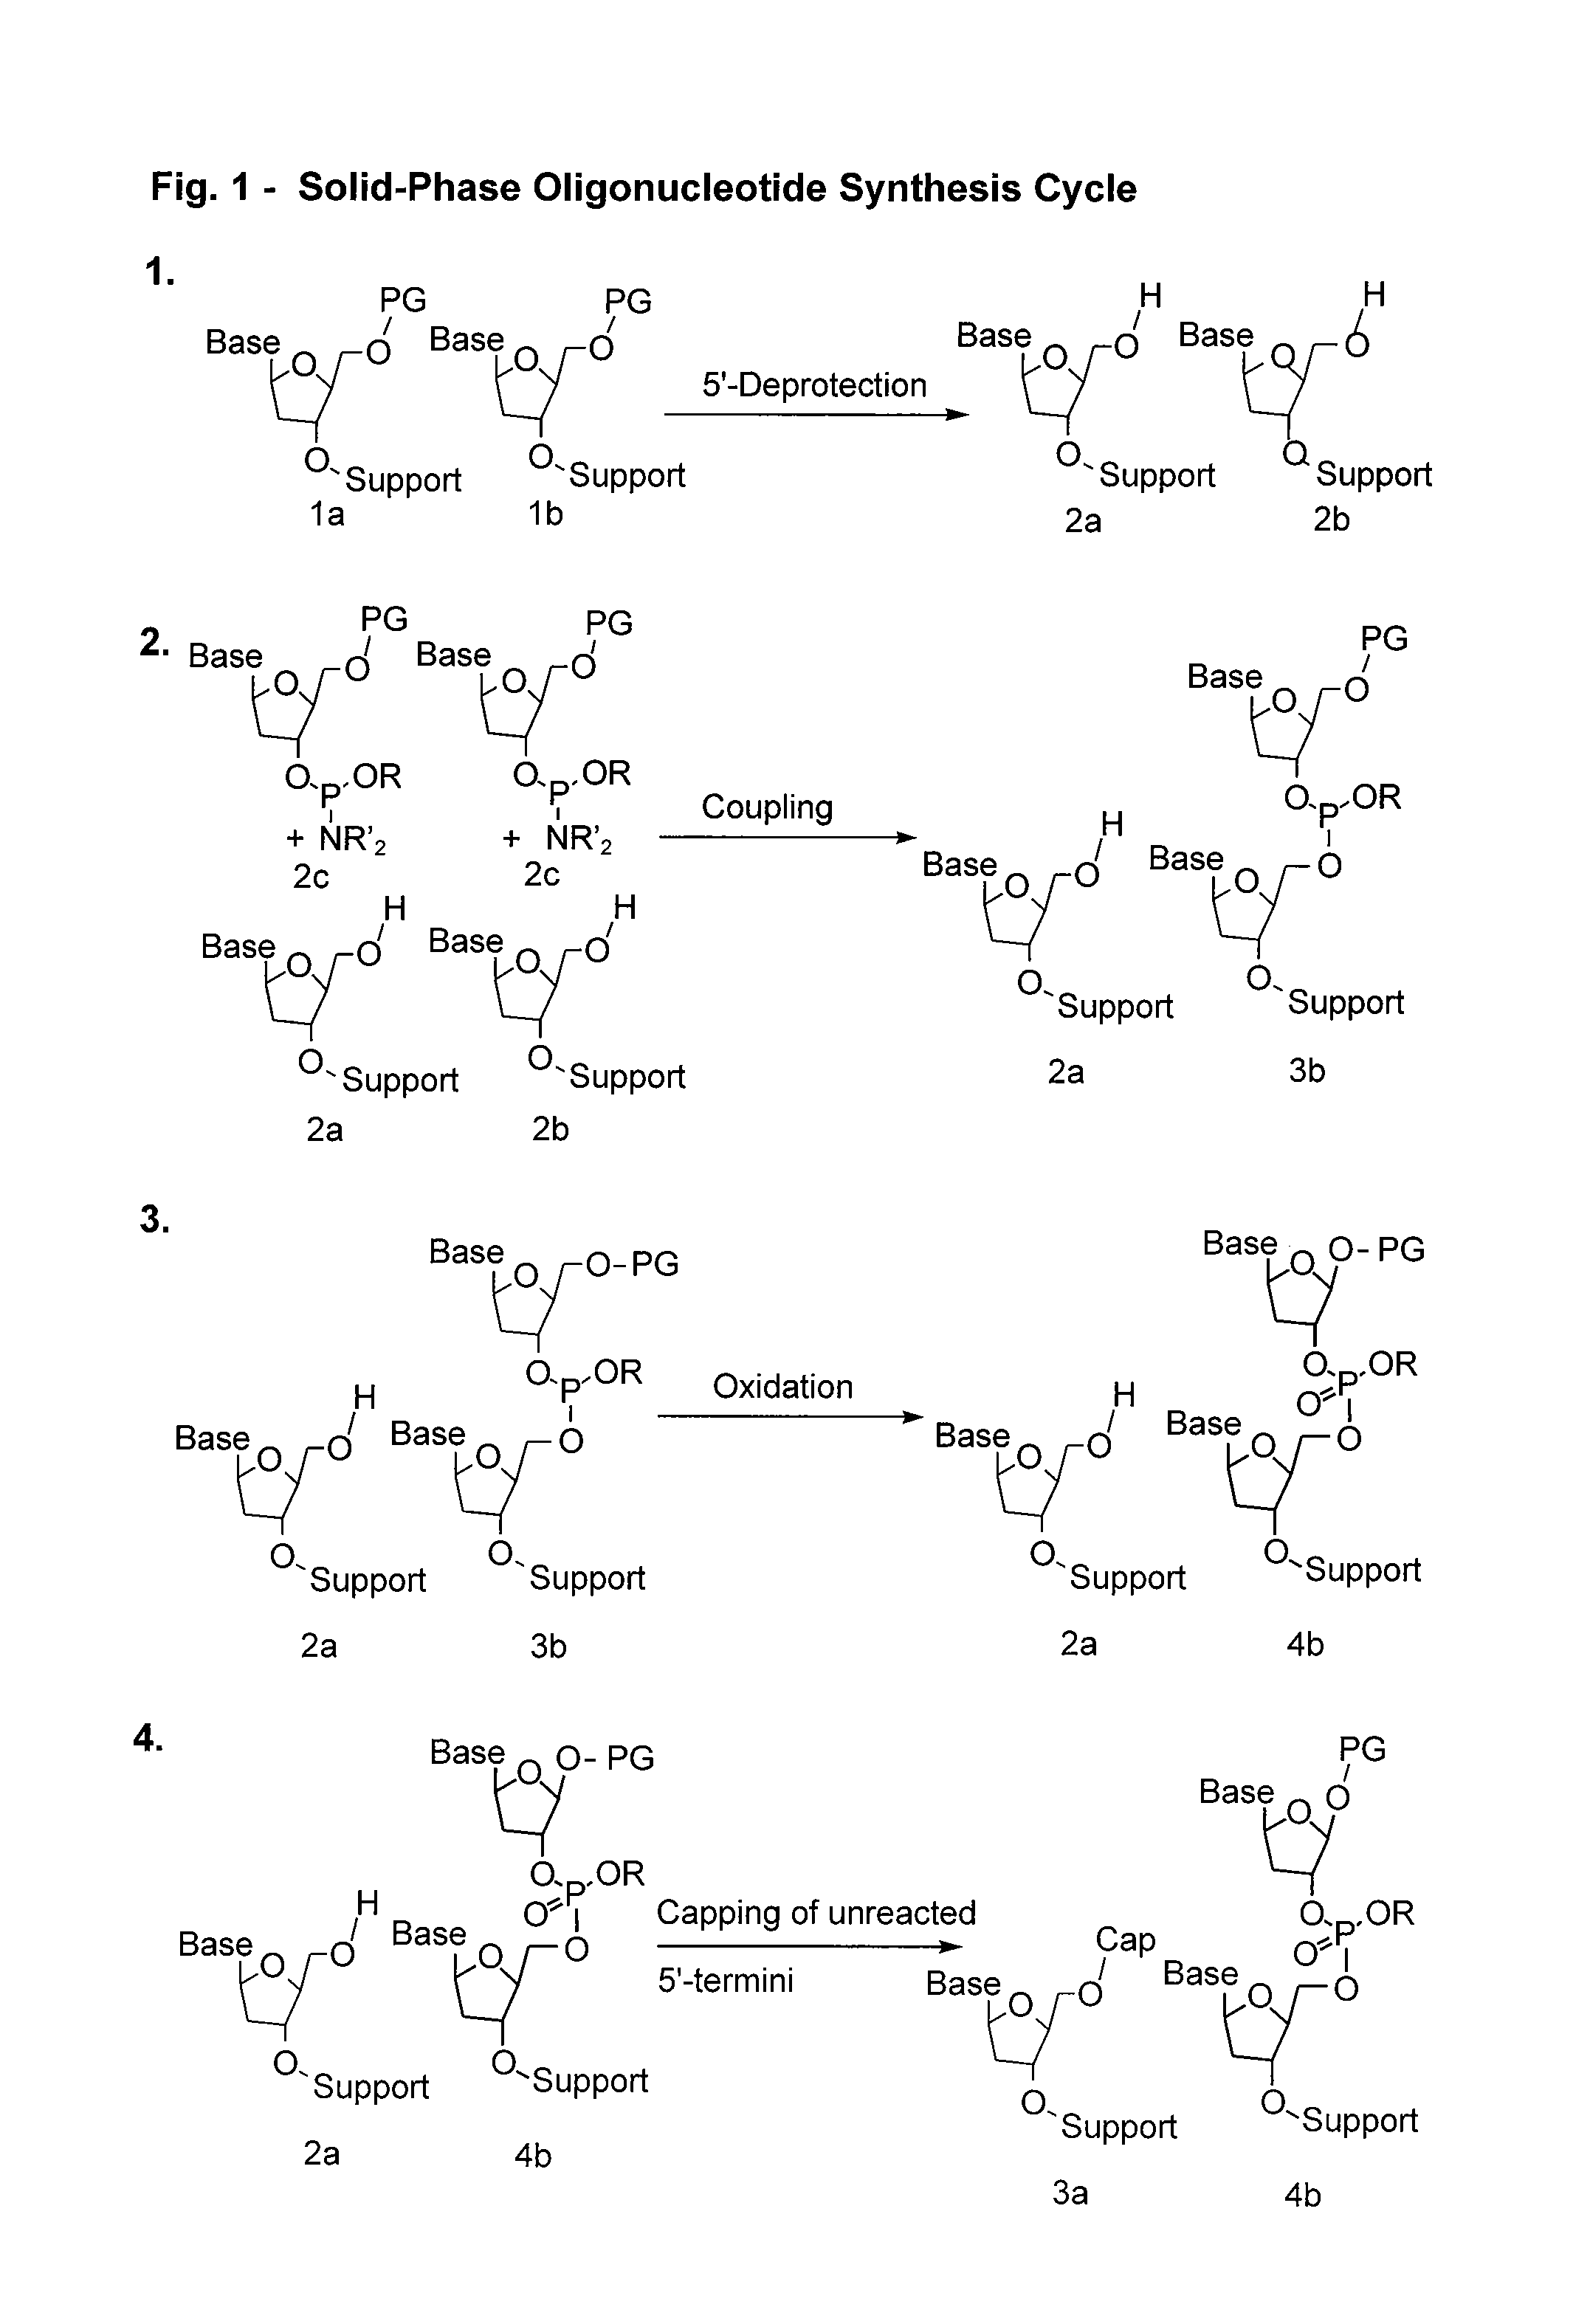 Compounds and methods for synthesis and purification of oligonucleotides